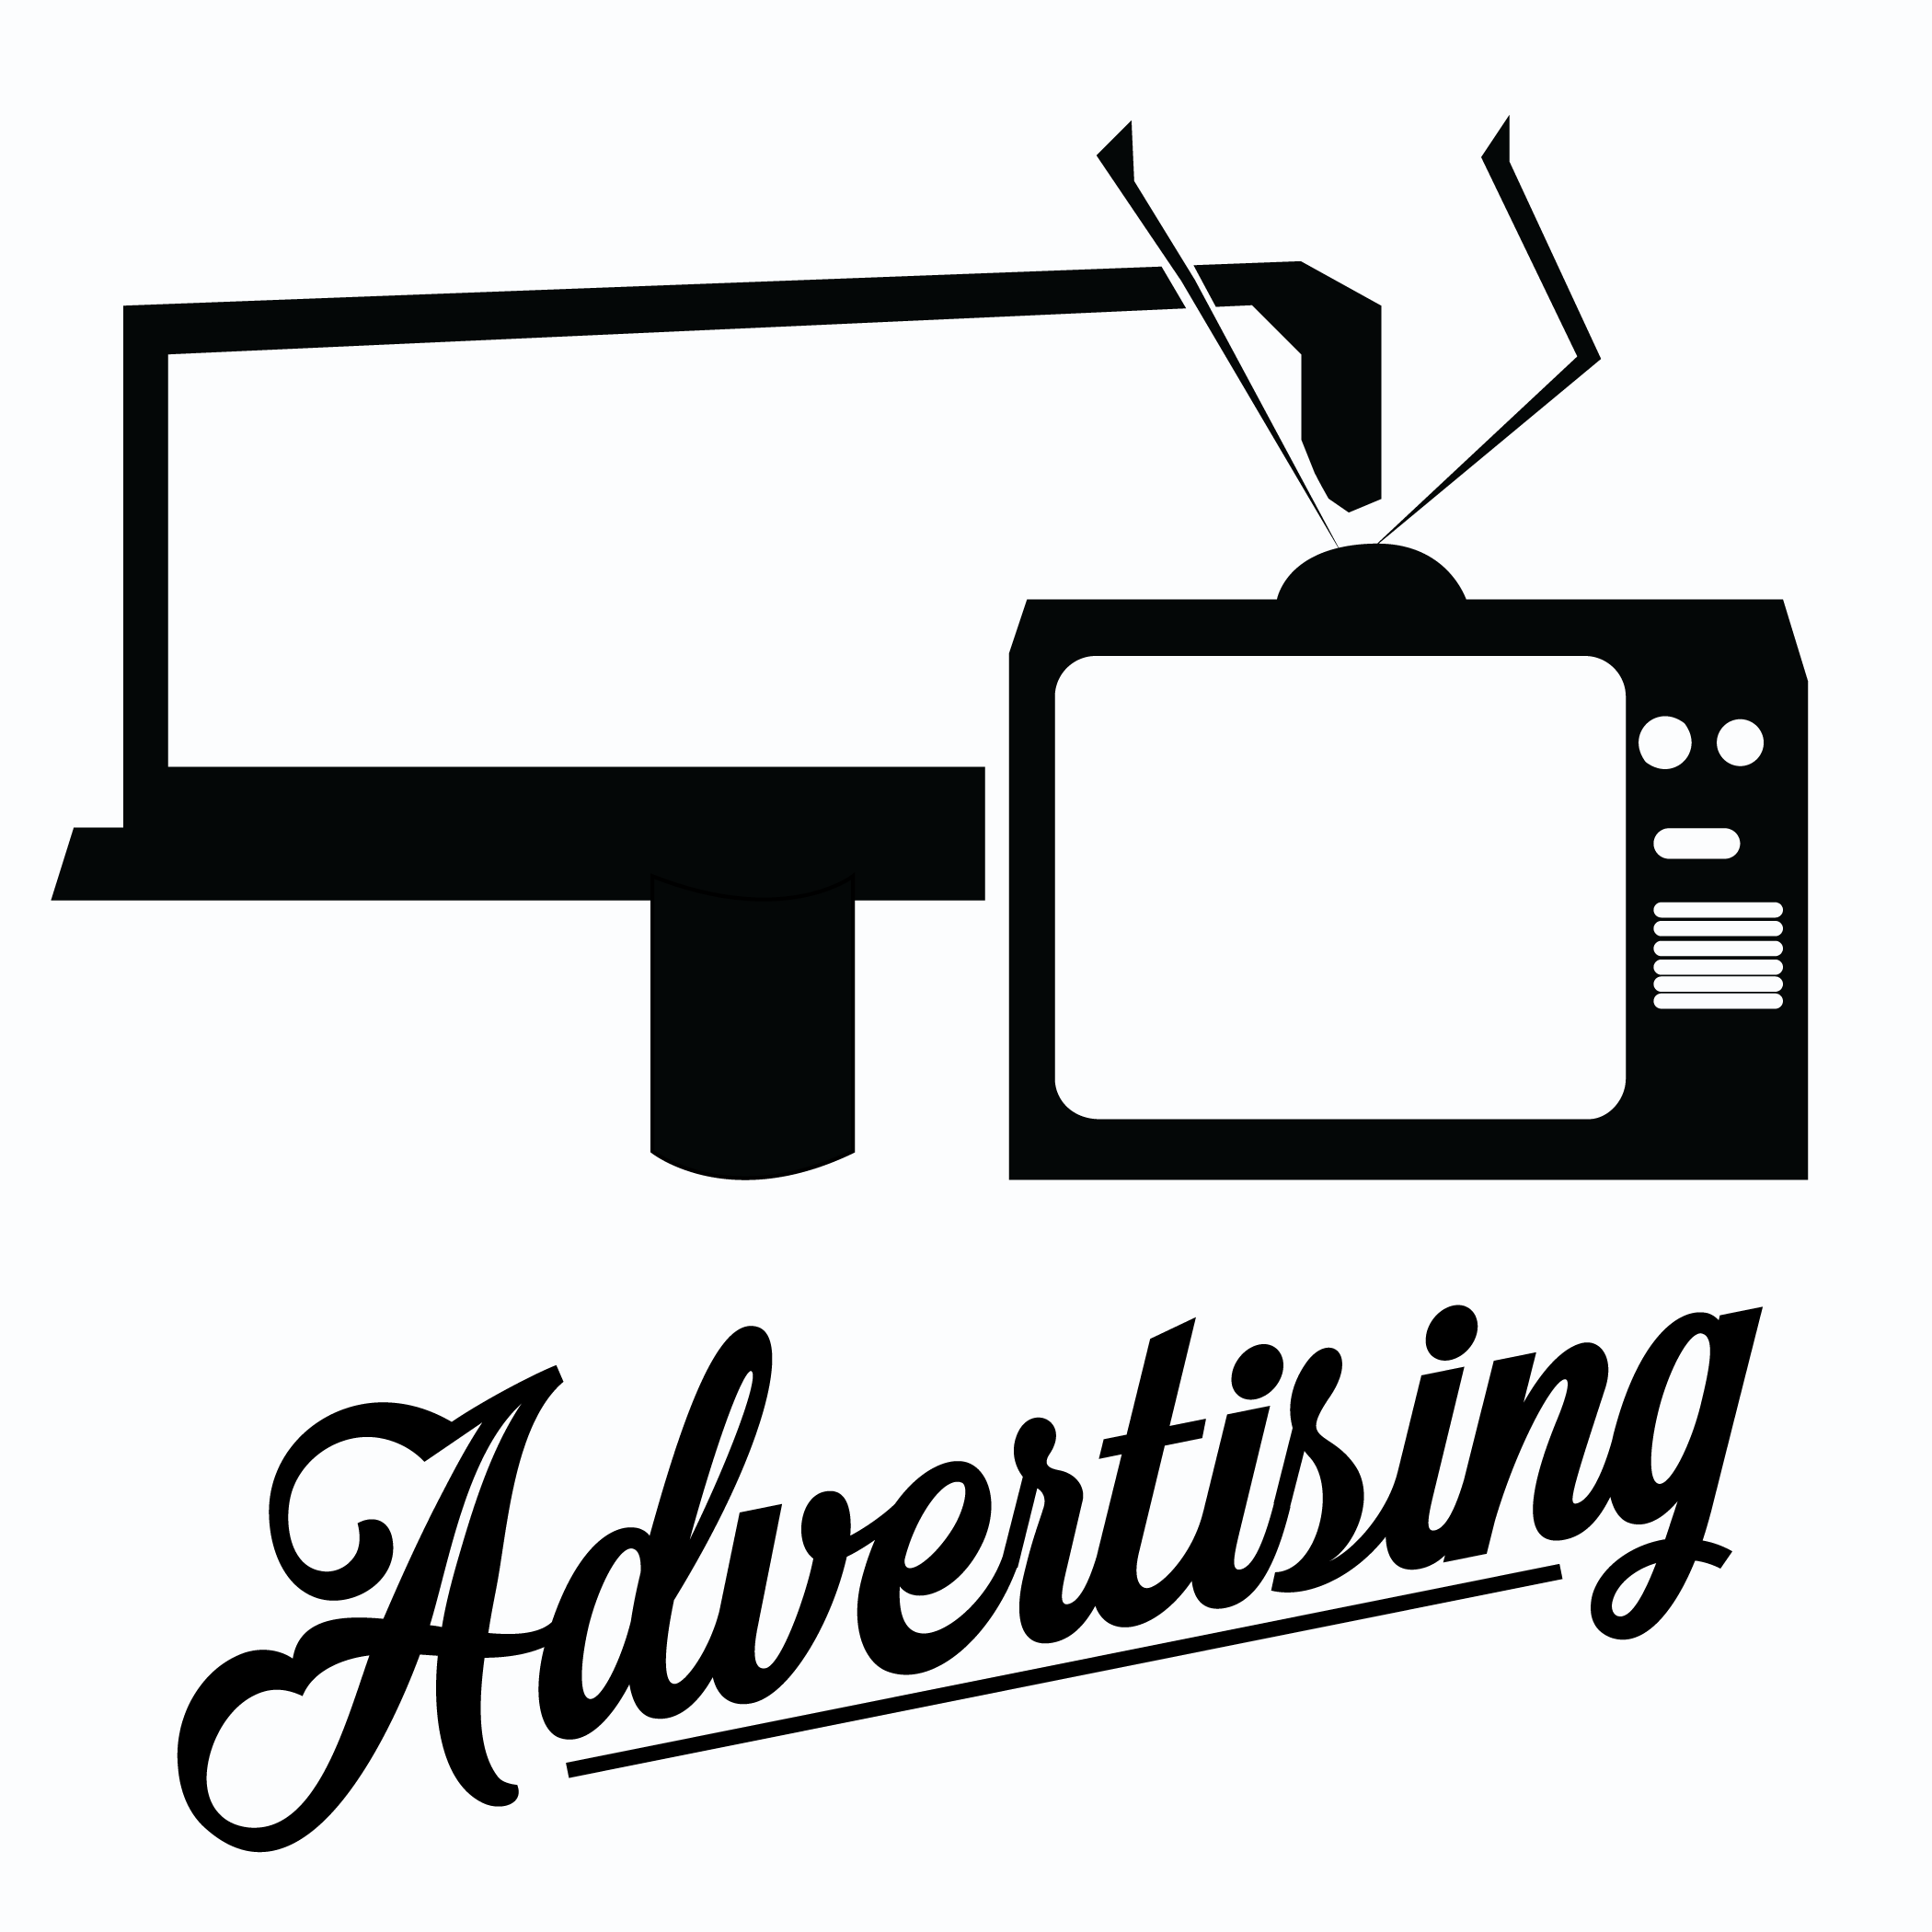 A billboard and a television representing advertising services.